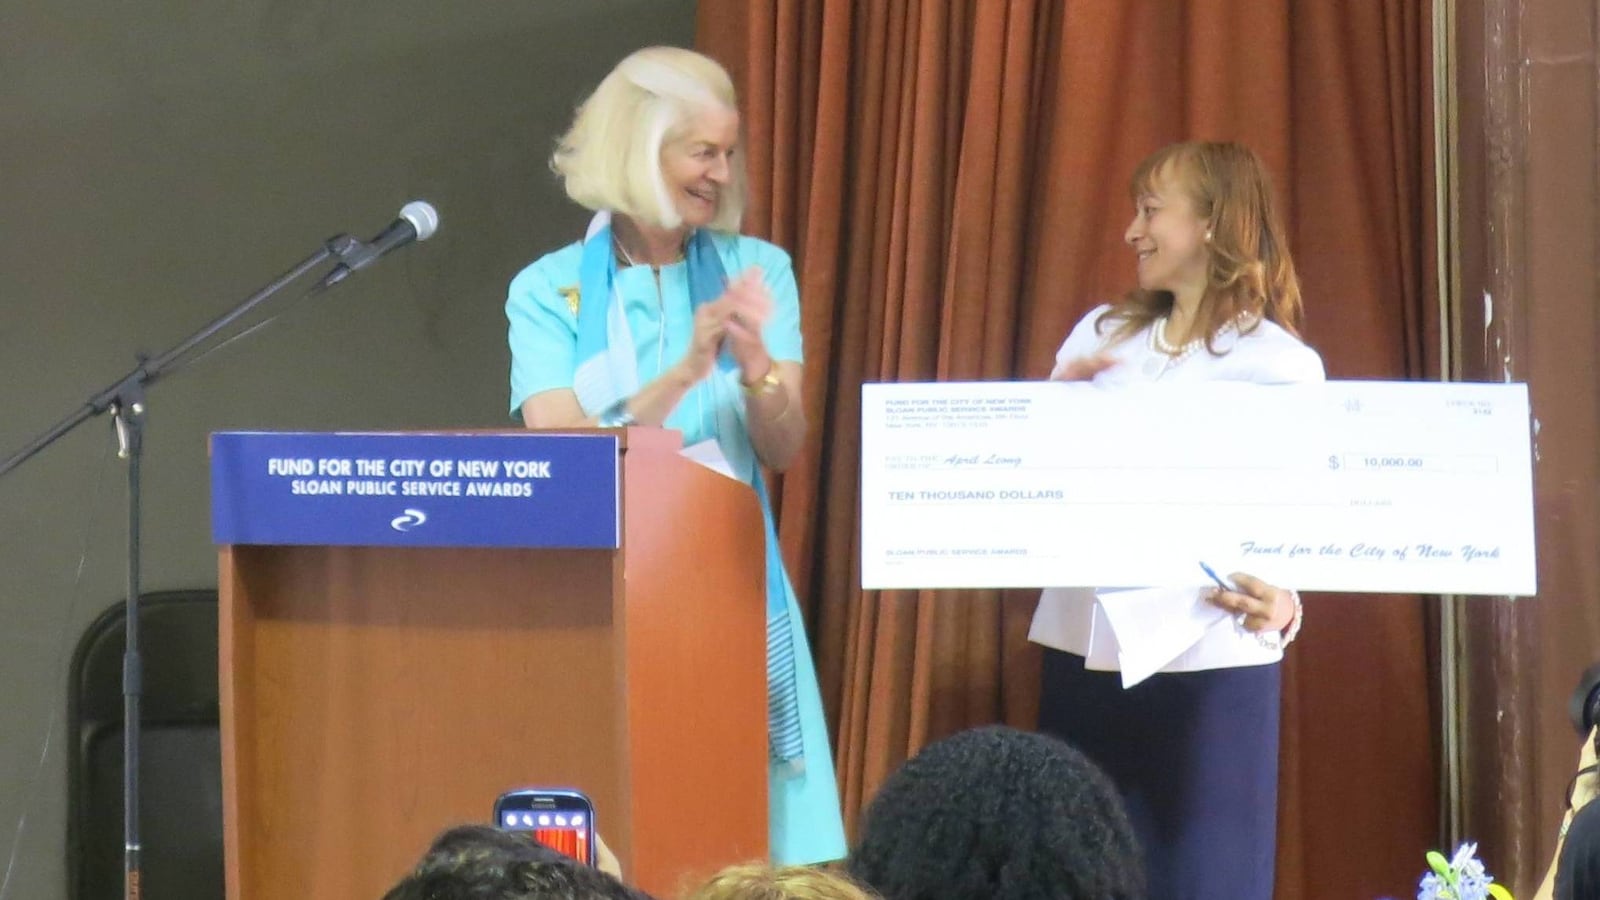 Liberation Diploma Plus High School Principal April Leong (right) receives her $10,000 check as a recipient of the 2014 Sloan Public Service Awards.